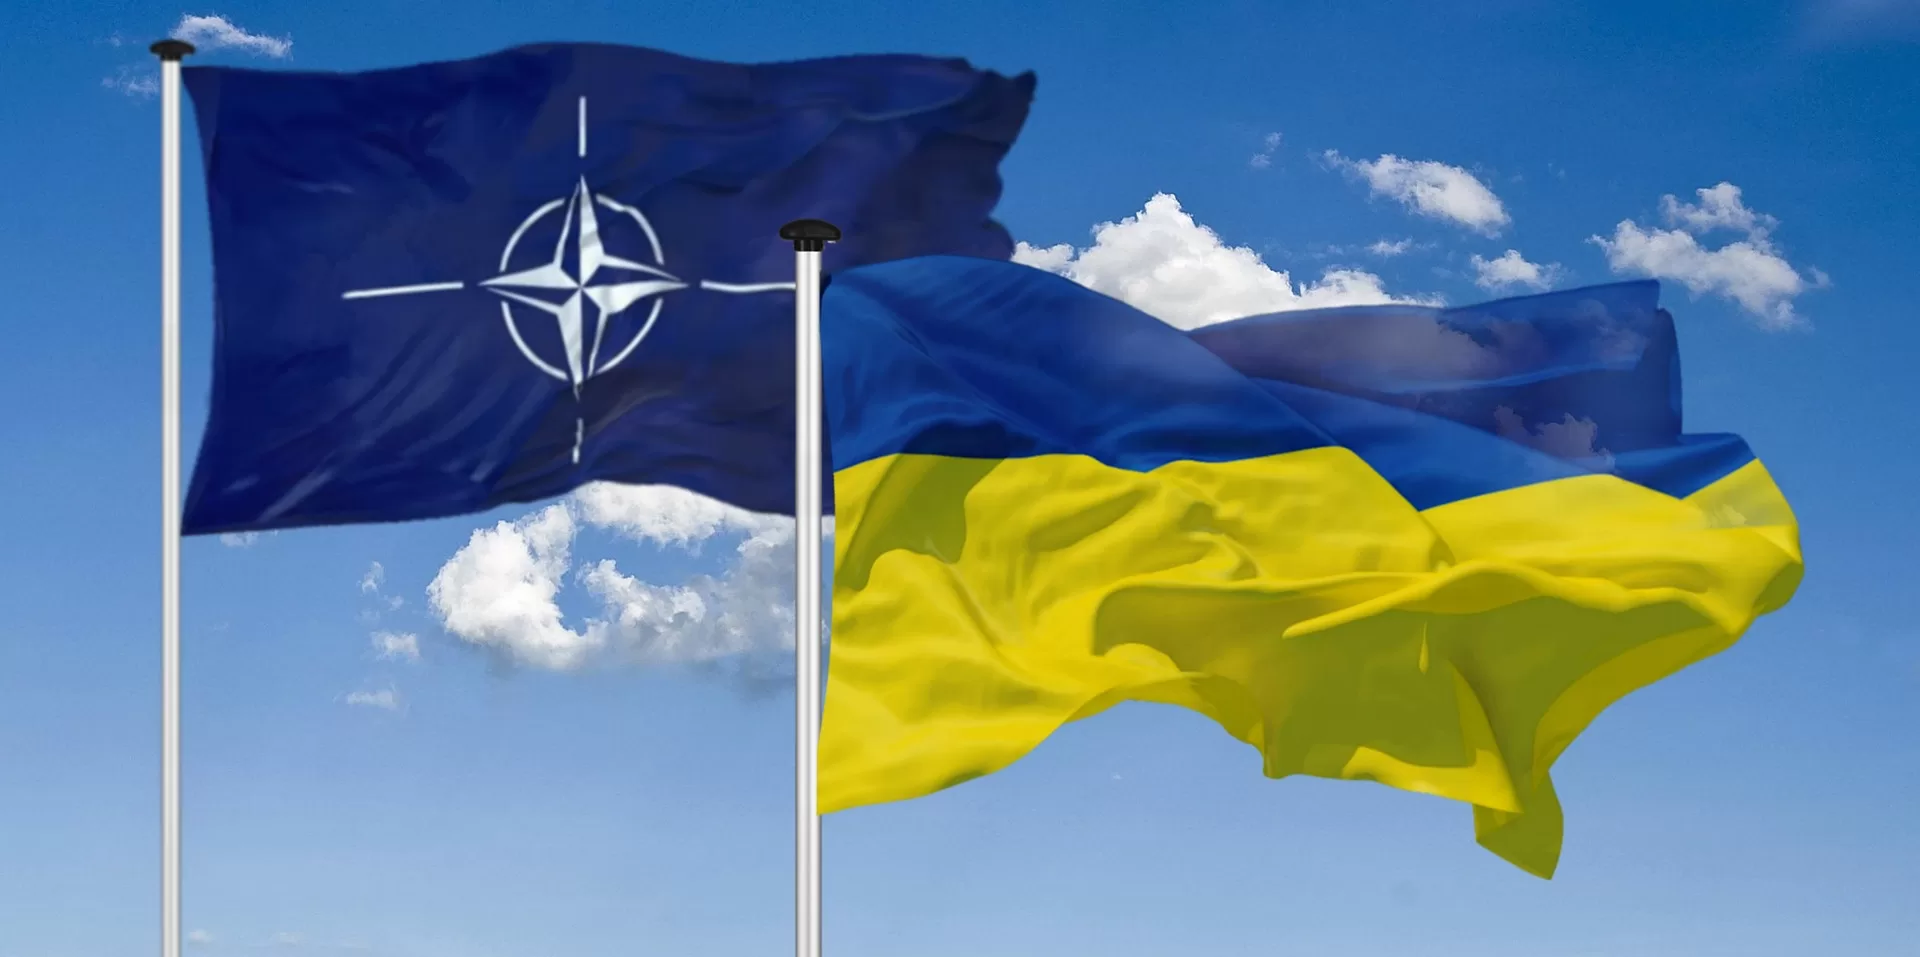 NATO Expansion: A Threat to Russia’s Security